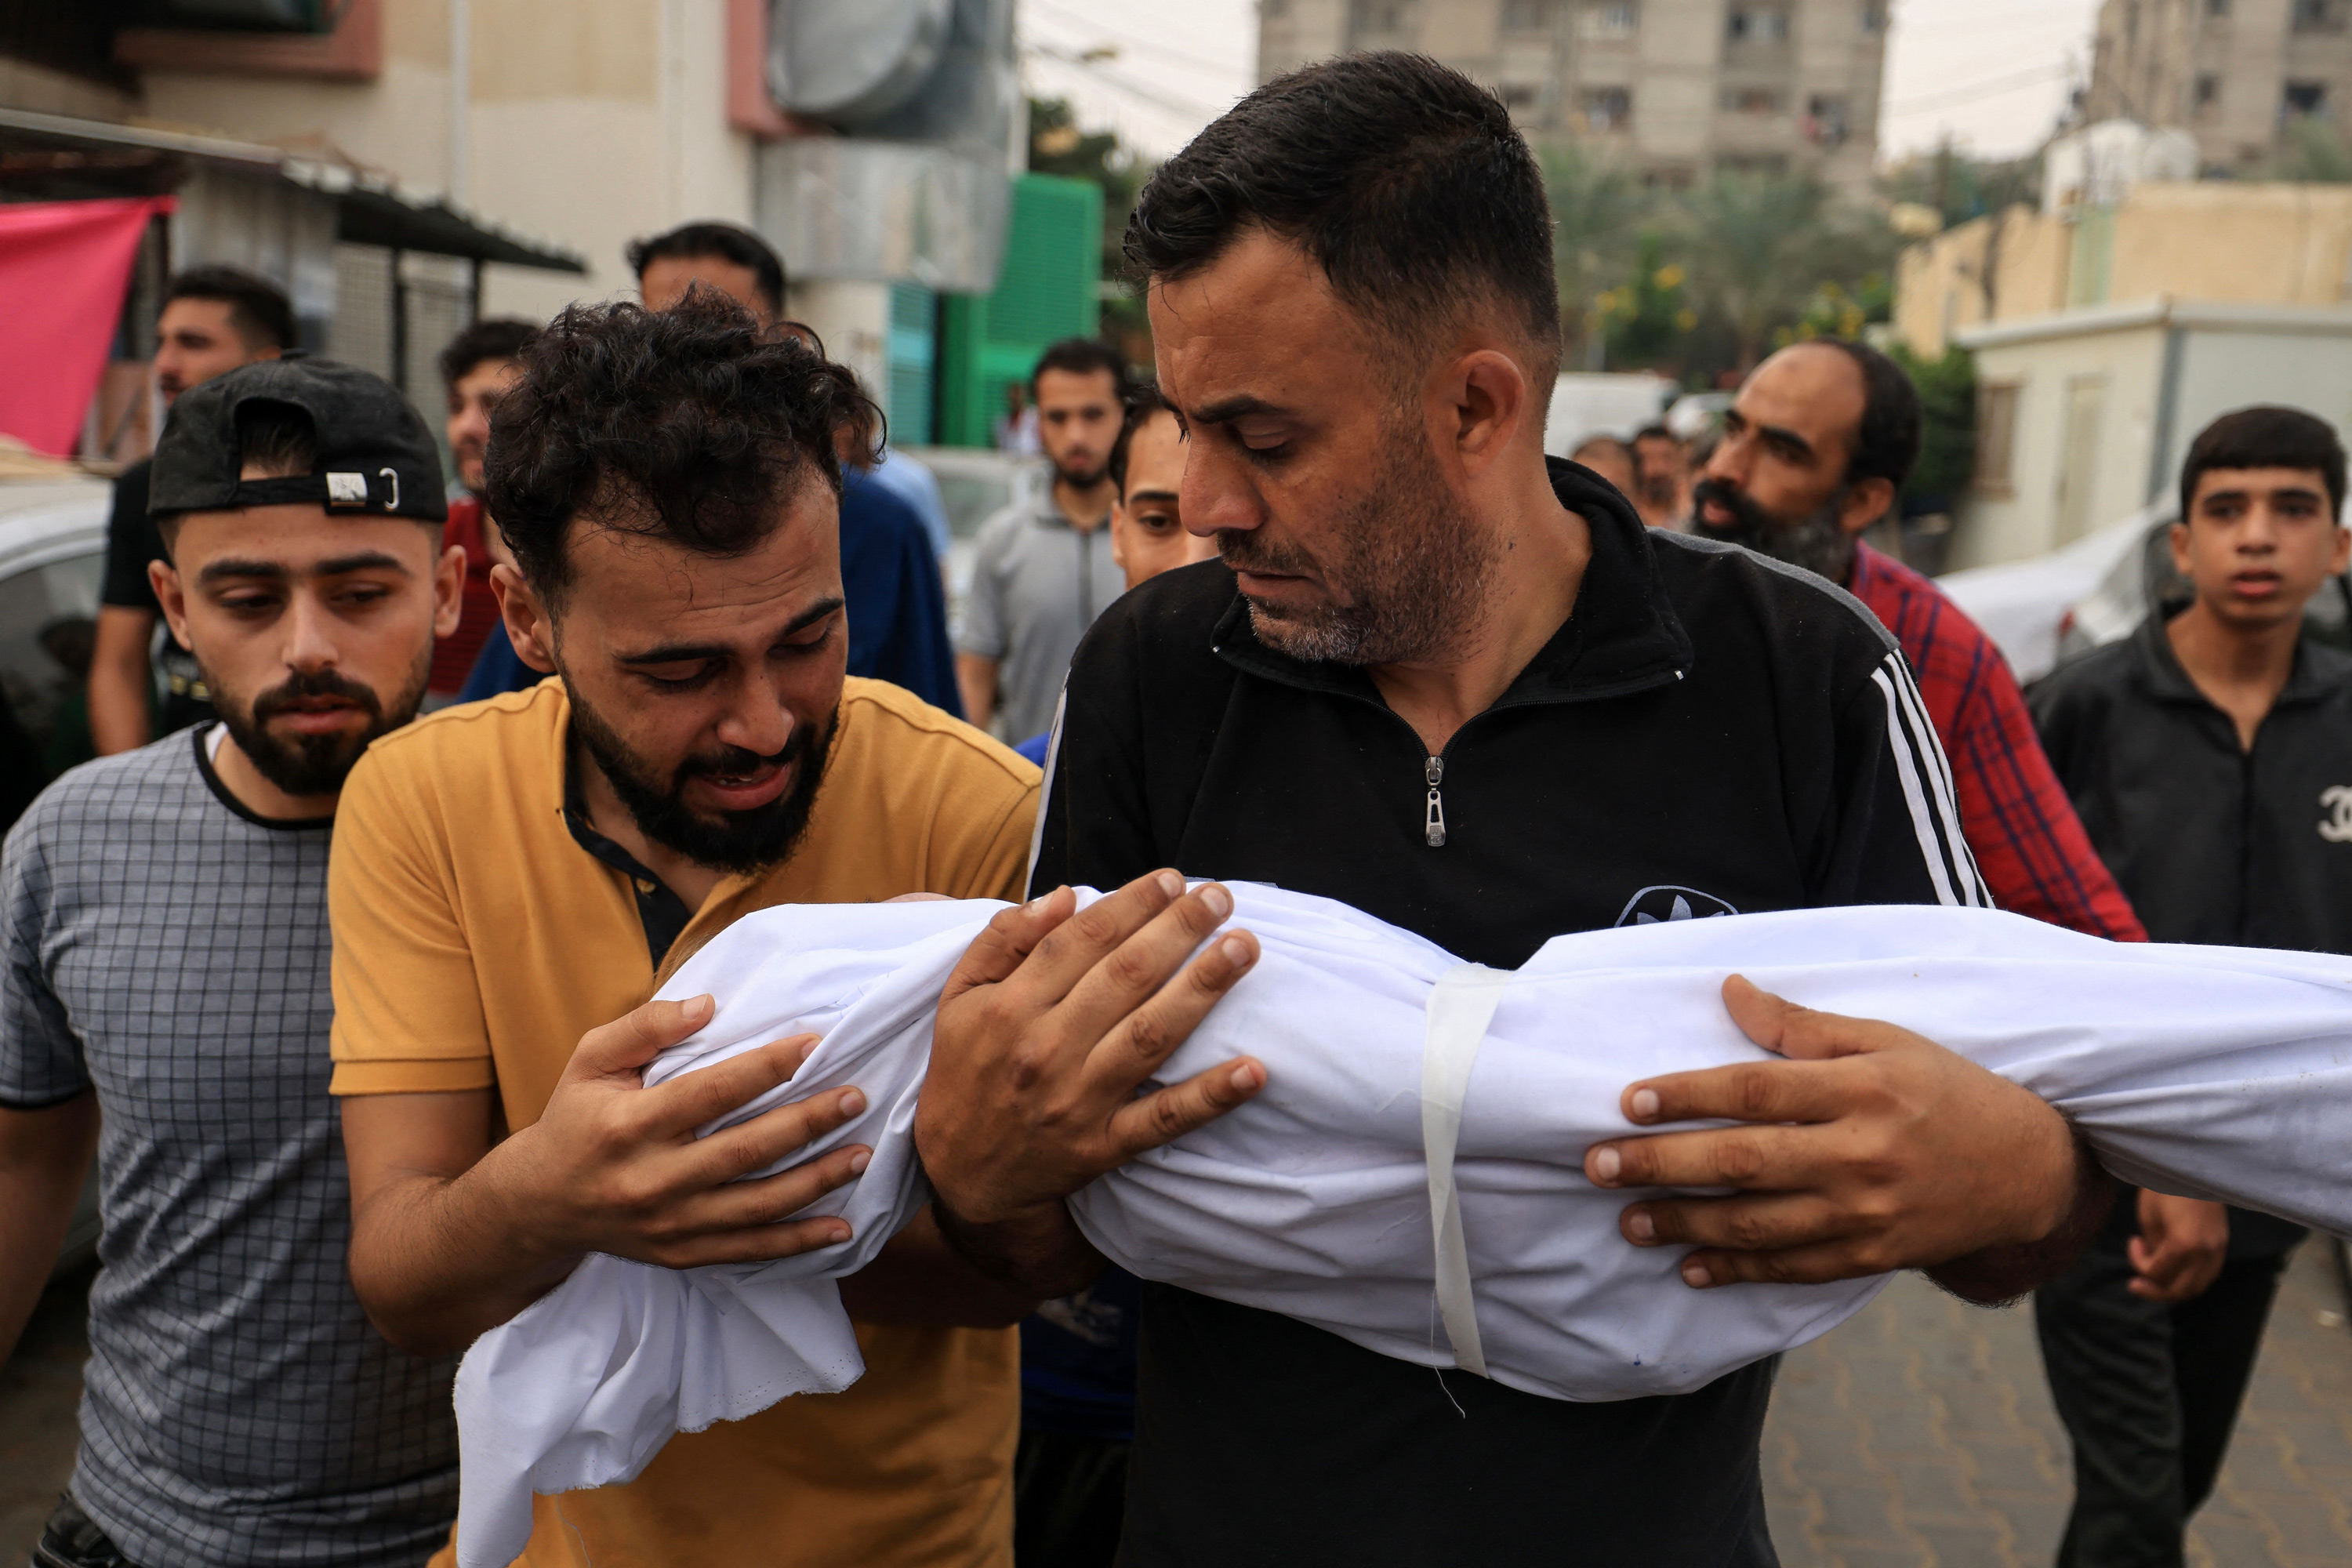 The father of a young boy from the al-Aqad family, reacts as he touches the body of his child, killed in an Israeli strike on Khan Younis, southern Gaza, before his burial on October 29.